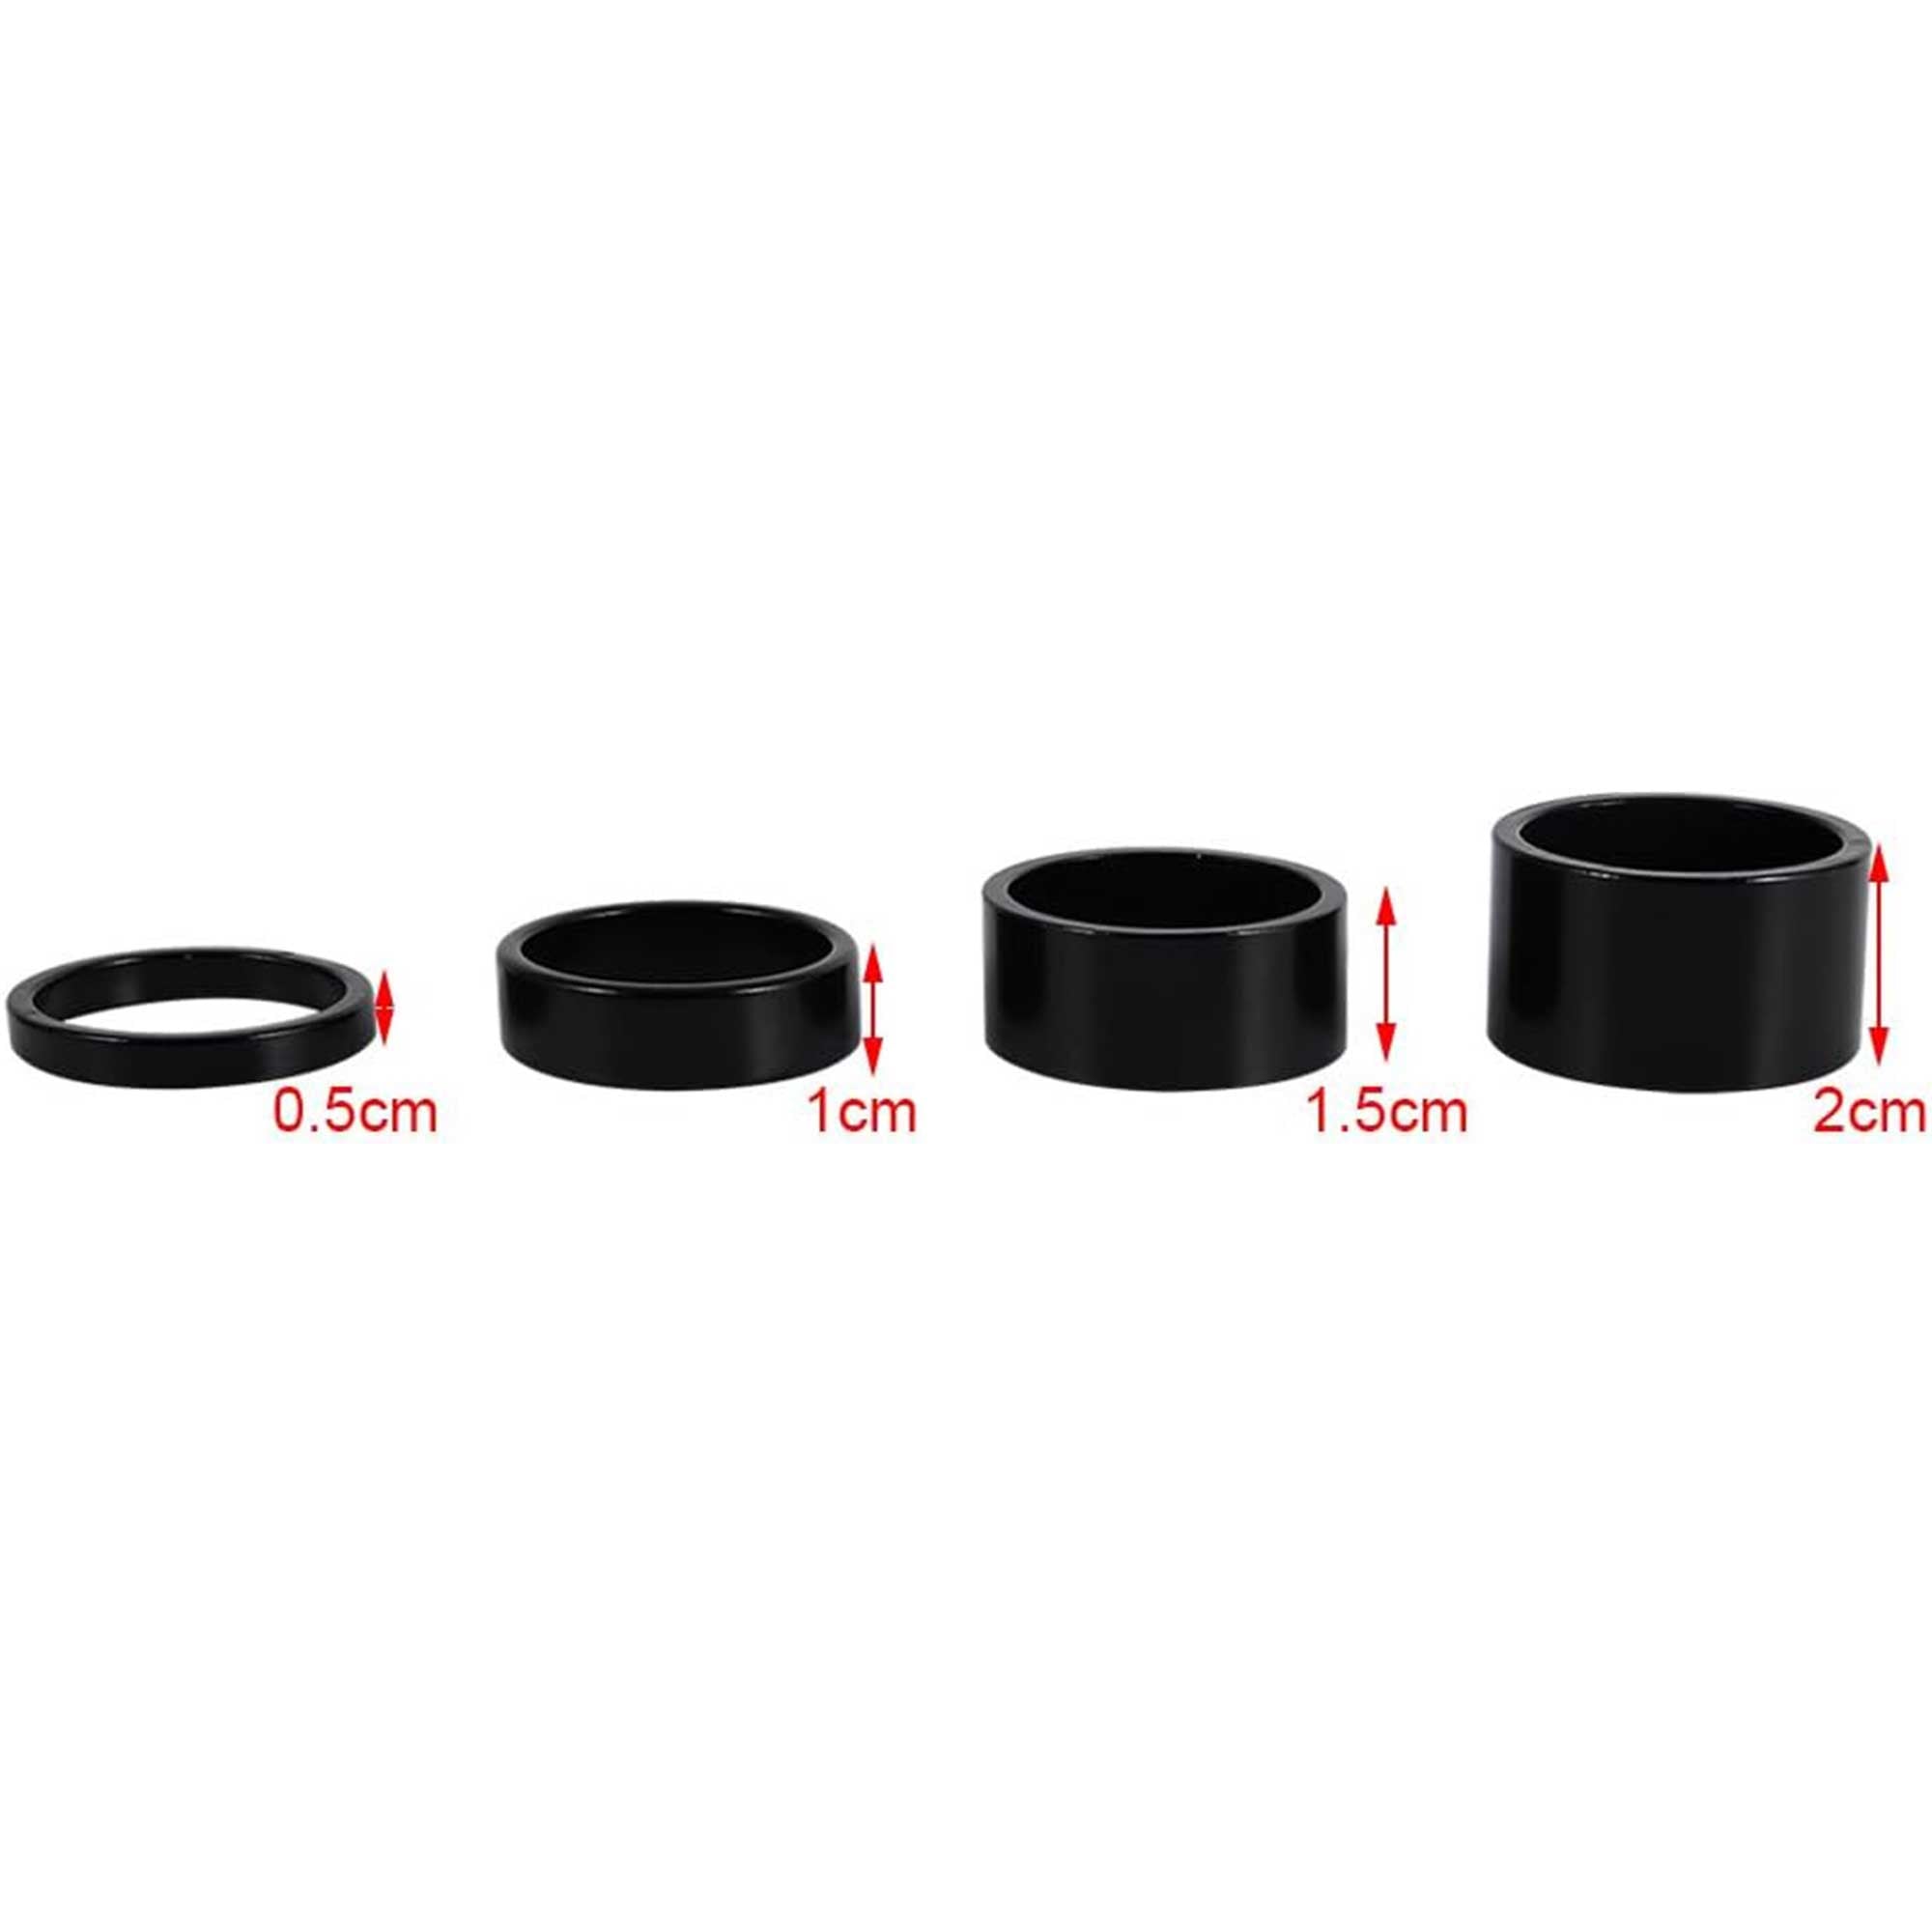 Headset 4PC Spacer Kit - 5mm, 10mm, 15mm, 20mm